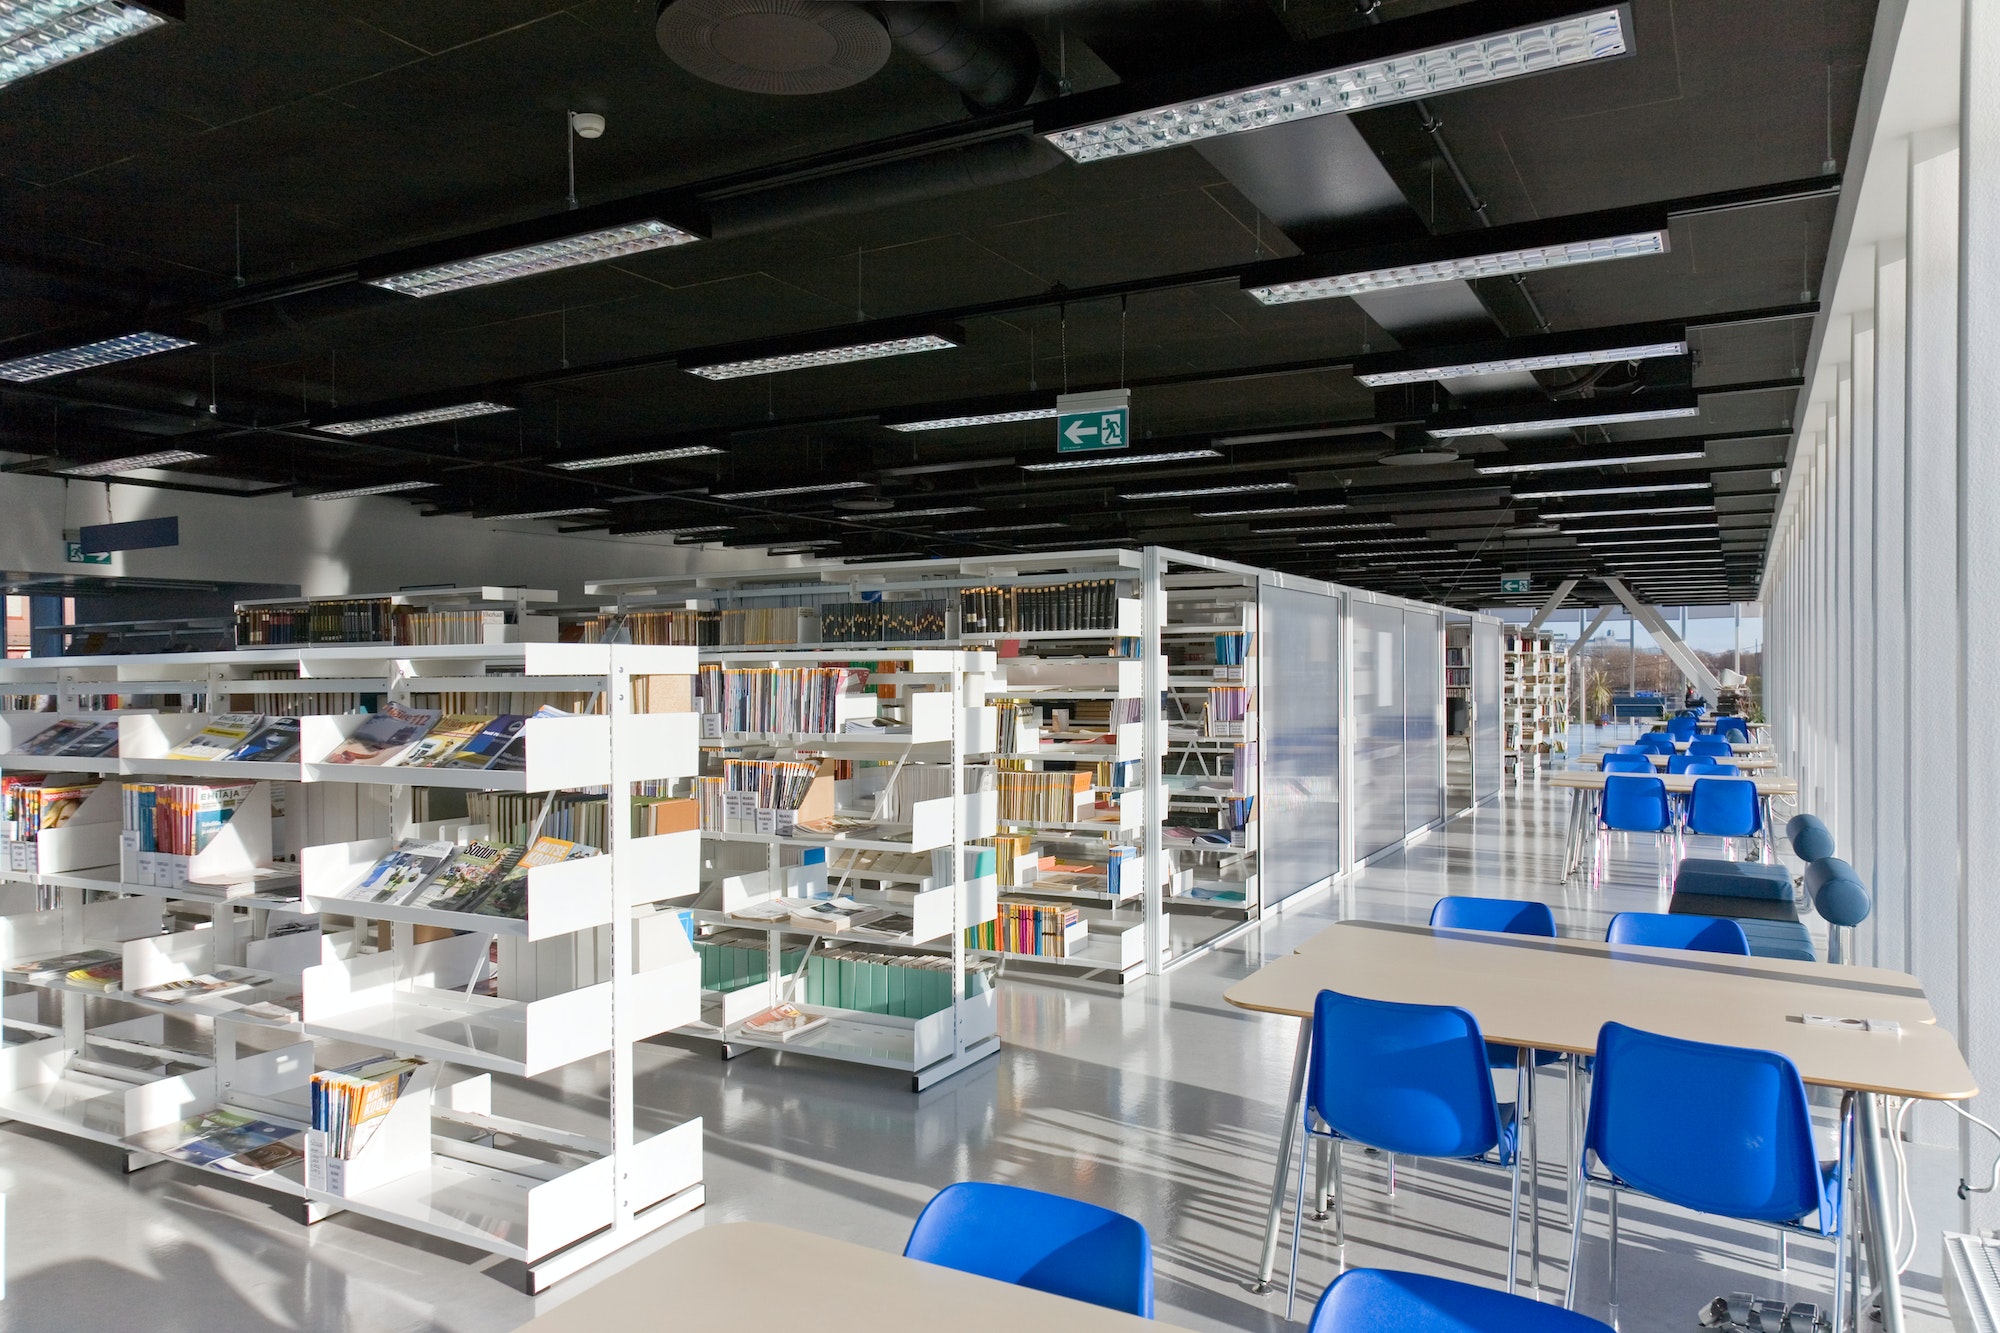 Public Library Interior, modern building with book shelves